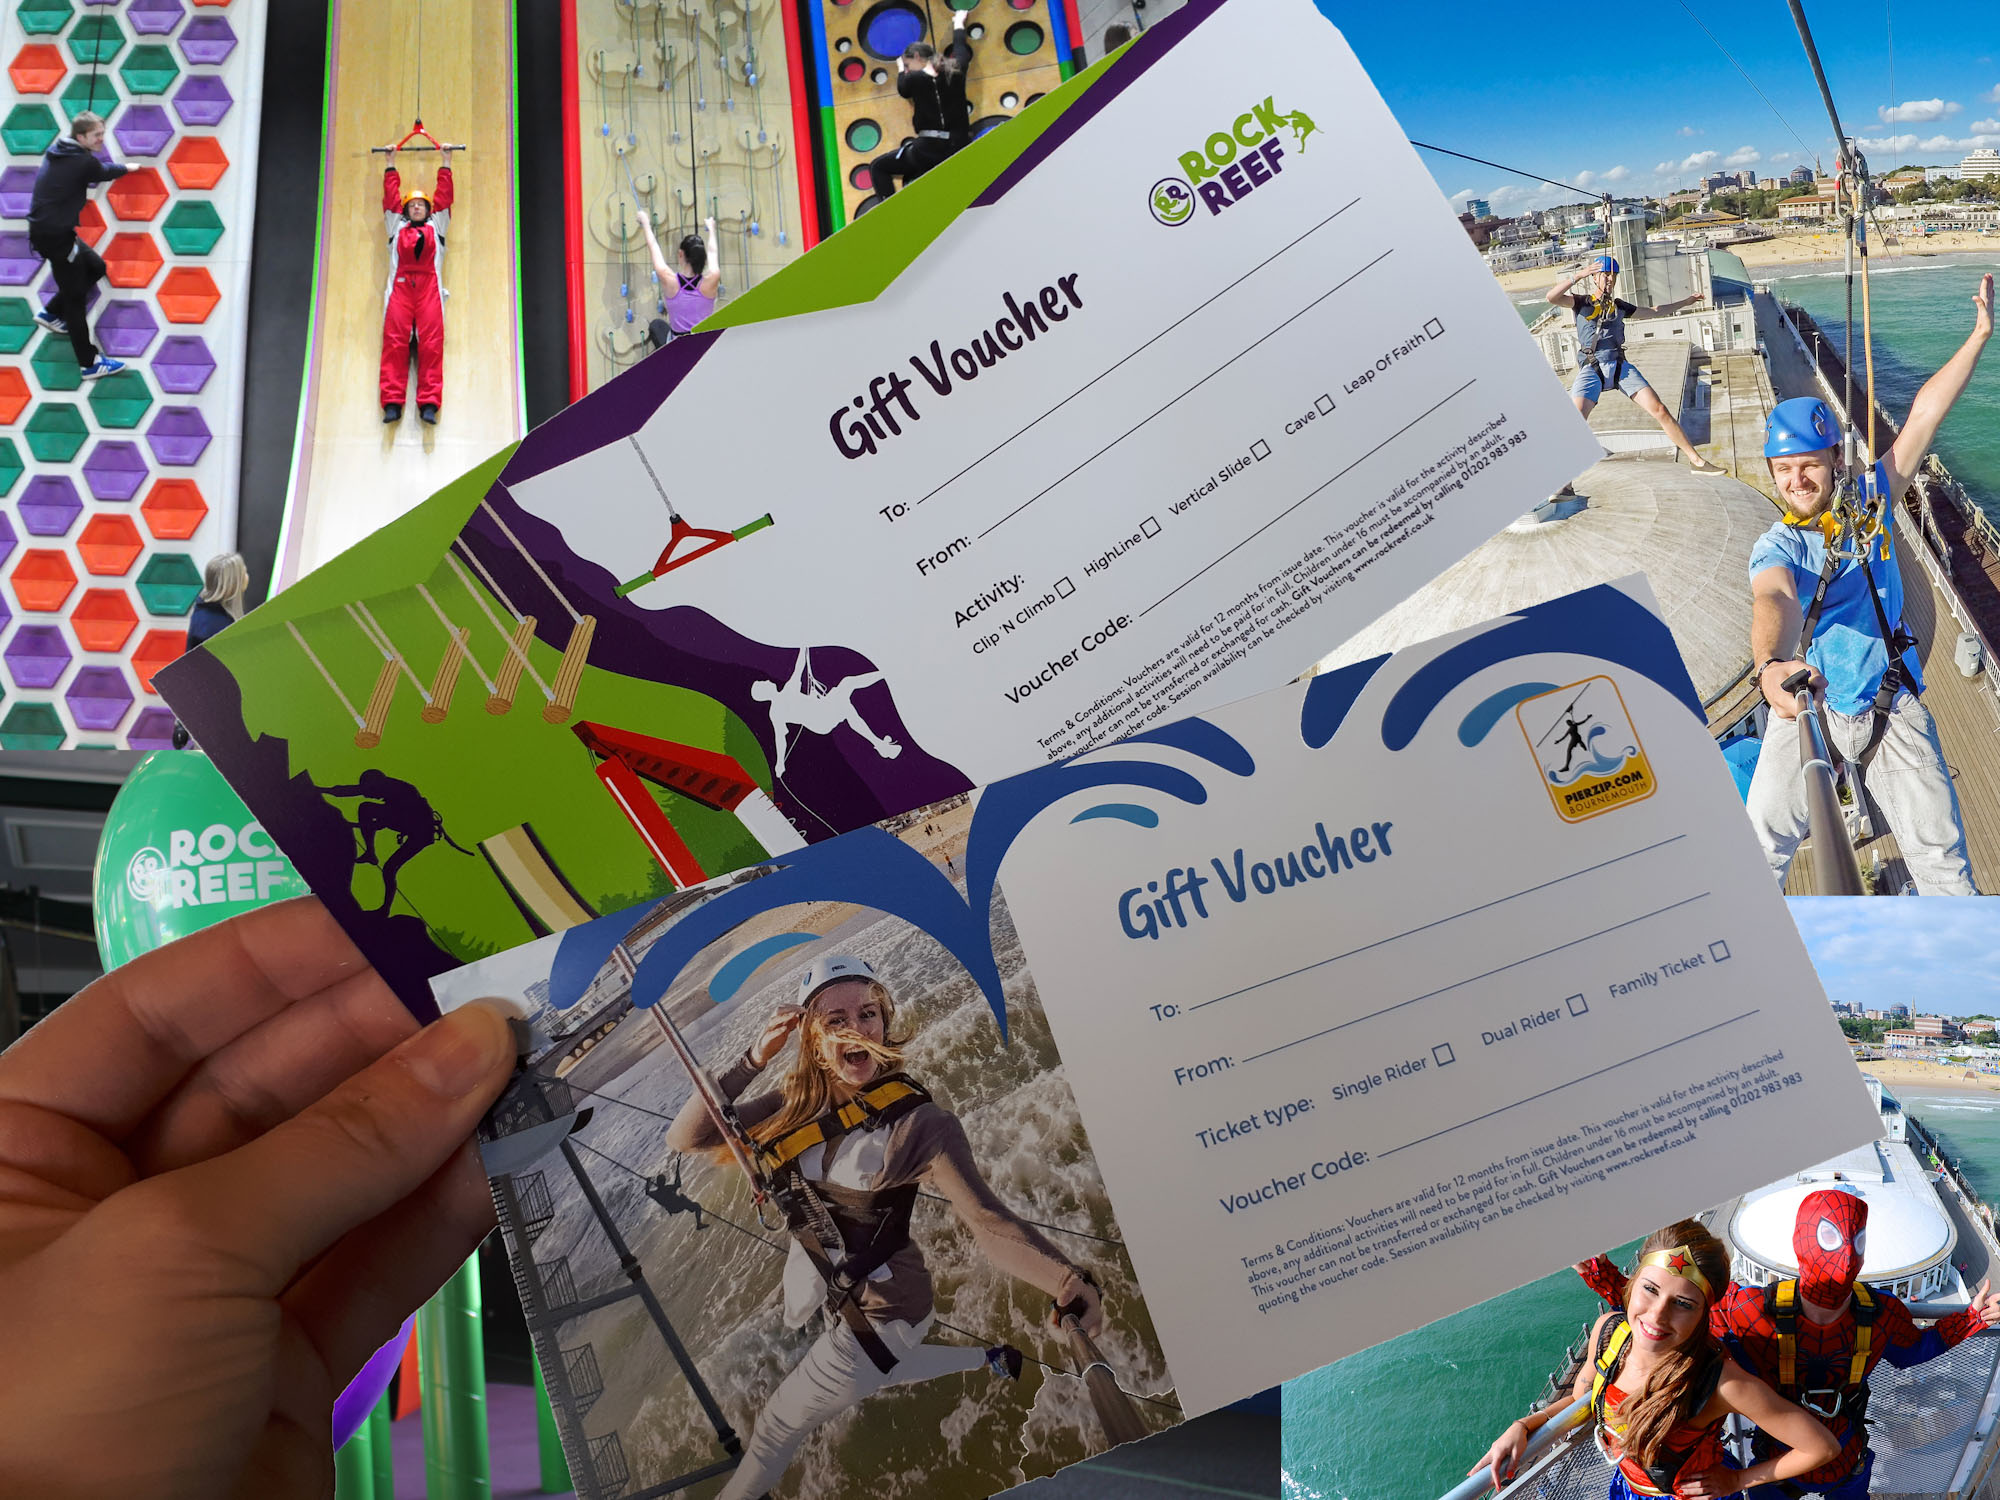 Be inspired with Christmas Gift Vouchers for RockReef and the PierZip on Bournemouth Pier!